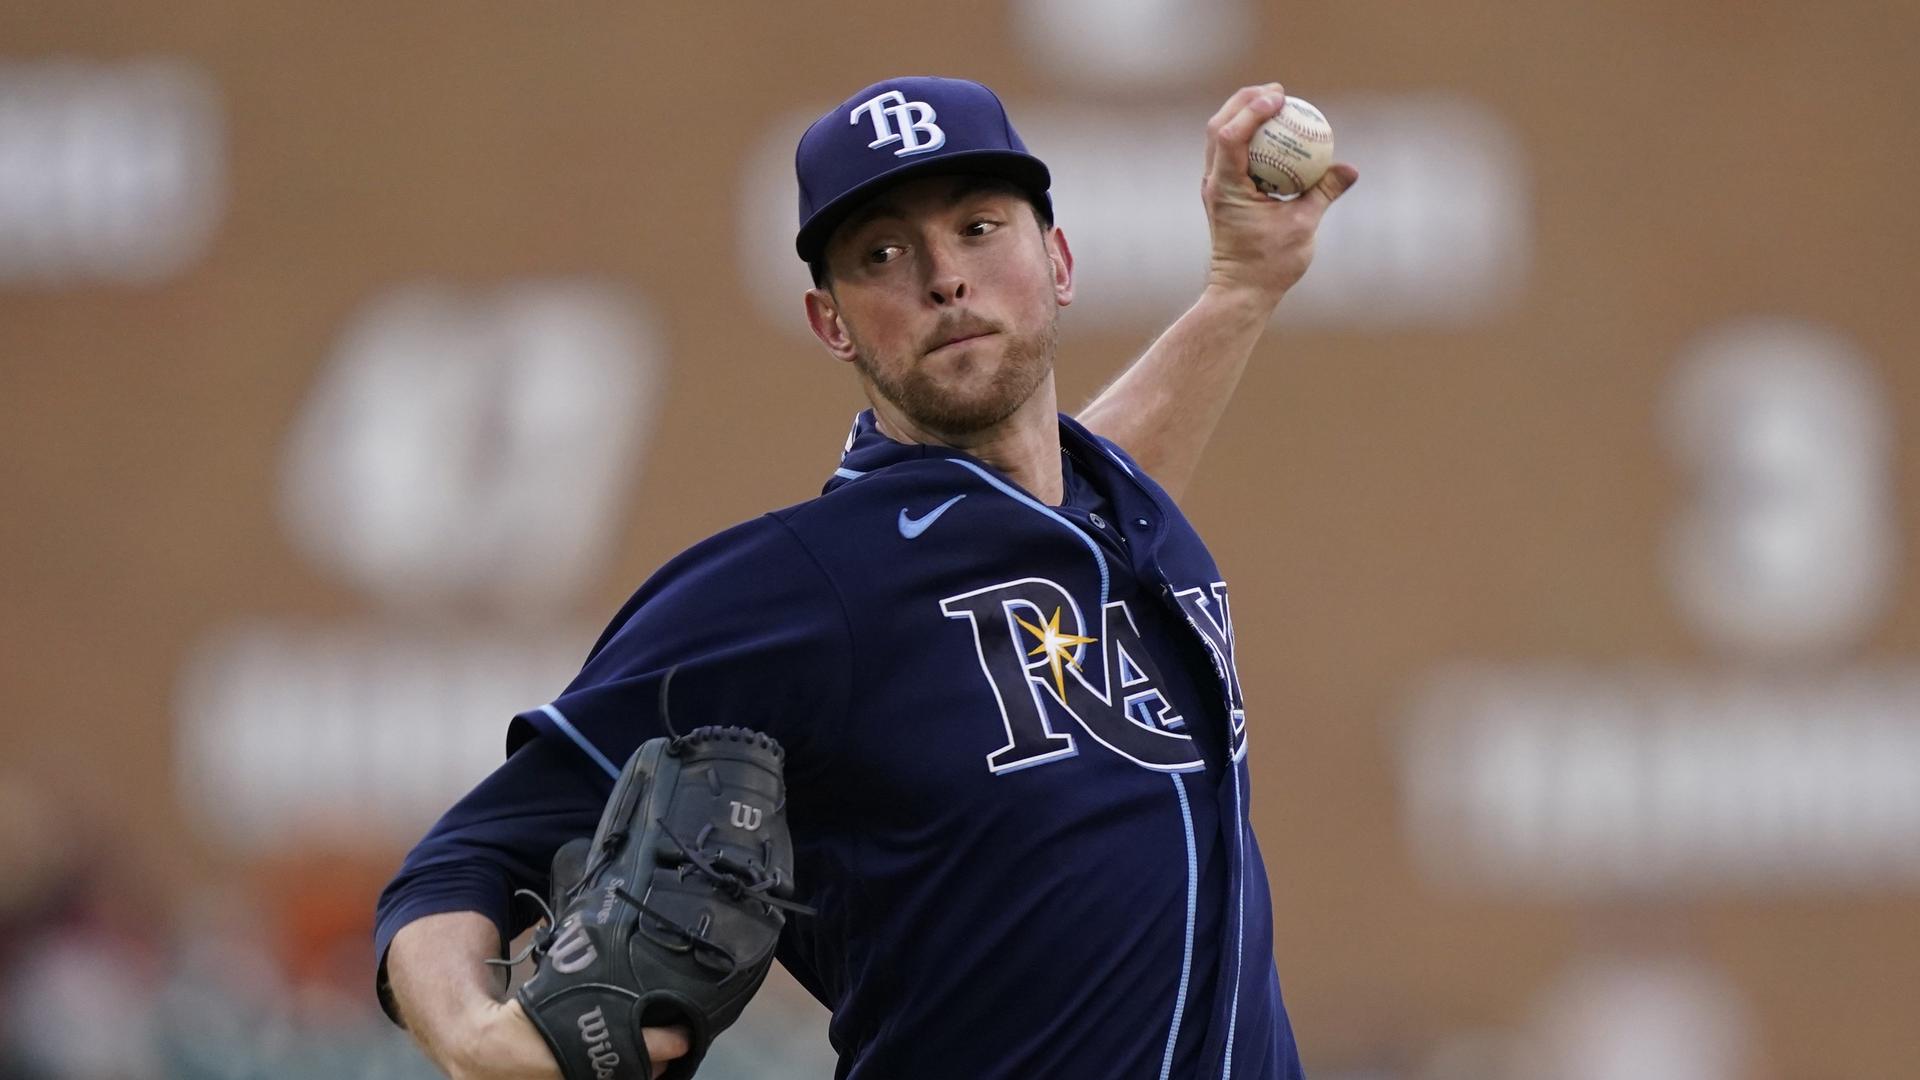 Rays vs. Brewers Player Prop Bets Today - August 10, 2022: Springs Strikeouts Tonight on the Mound